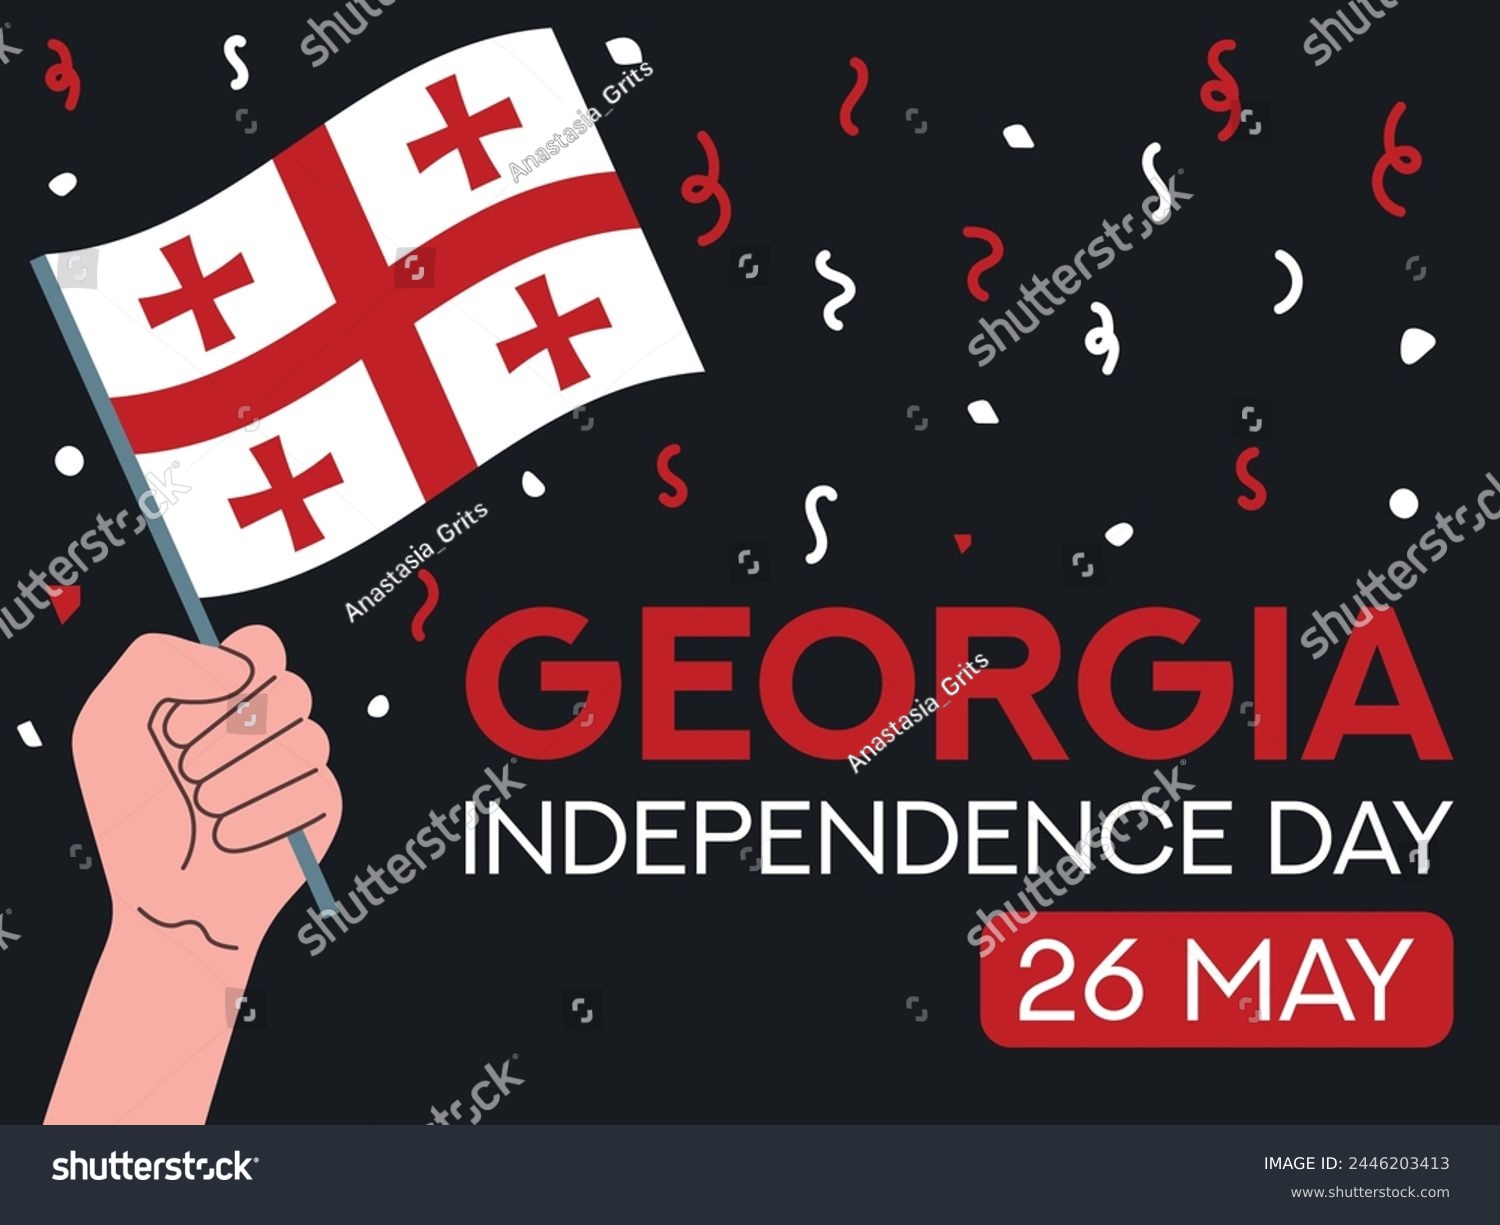 SVG of Georgia independence day 26 may. Georgia flag in hand. Greeting card, poster, banner template	 svg